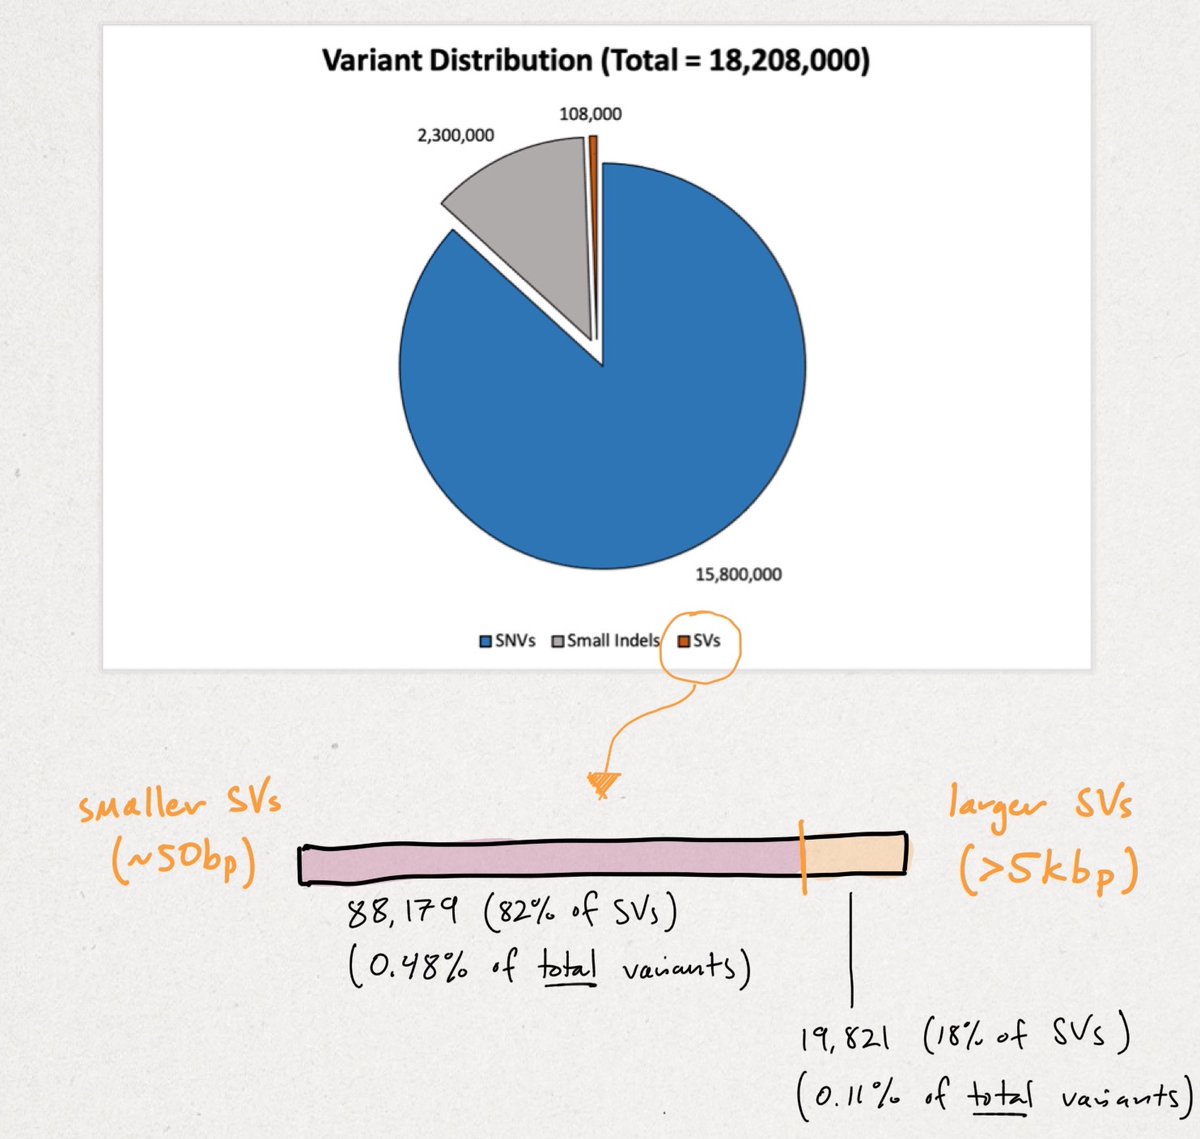 Let's now discuss the study's results.Across all samples, the researchers yielded 18,207,906 unique variants that break down in the following manner (see illustration below). We'll begin with the smallest variants (SNVs) and end with the largest structural variants (SVs).